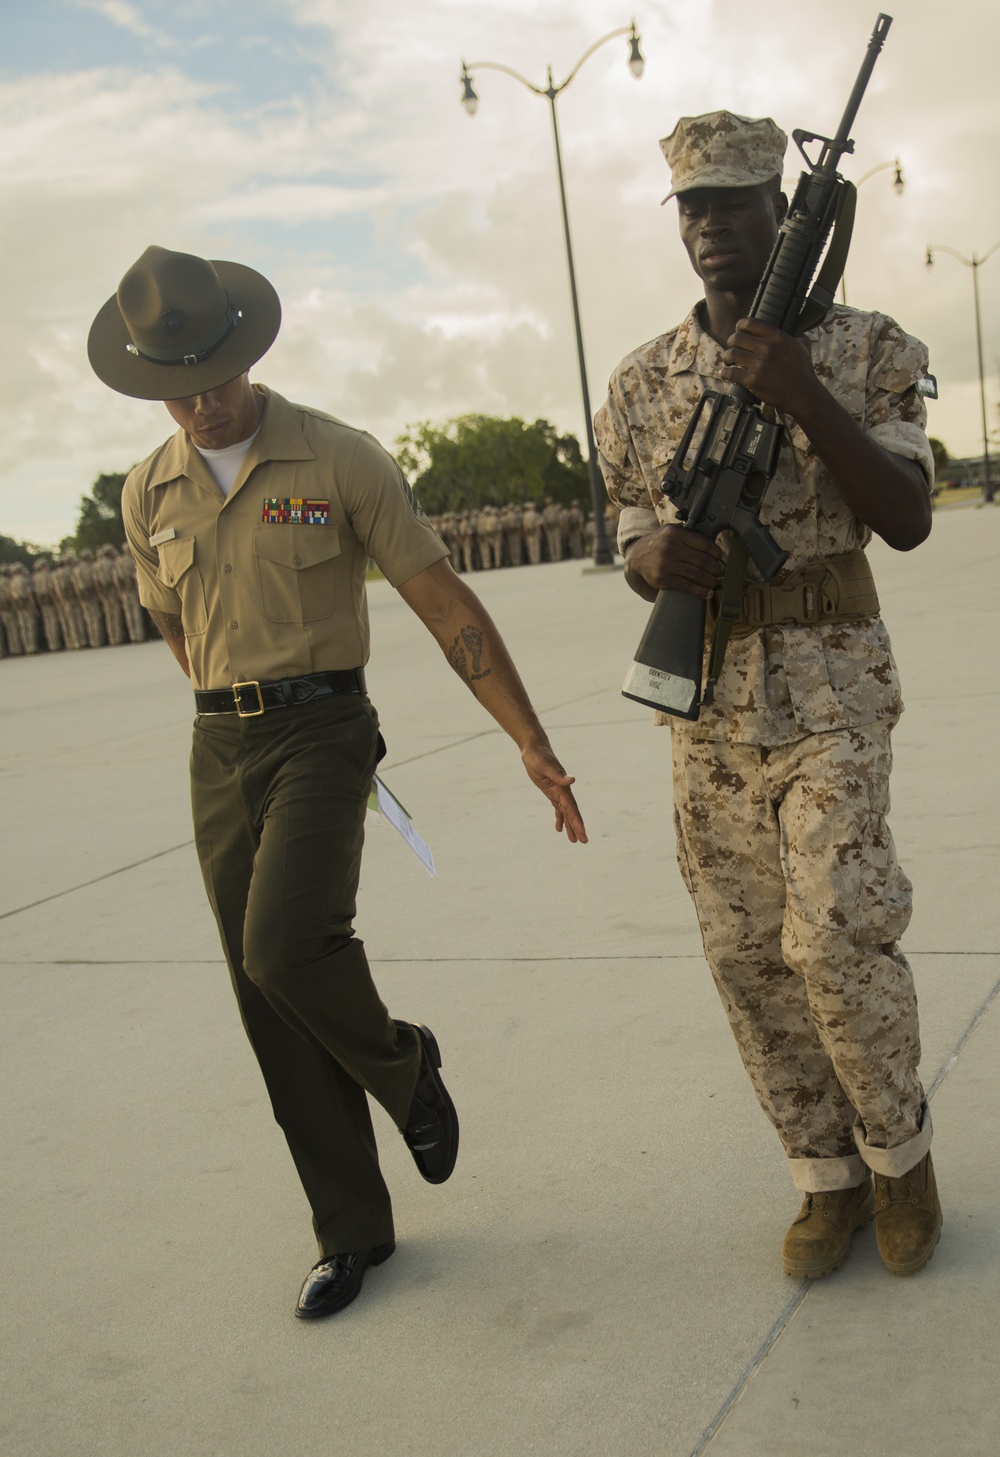 Marine recruits develop unit cohesion through close-order drill on Parris Island